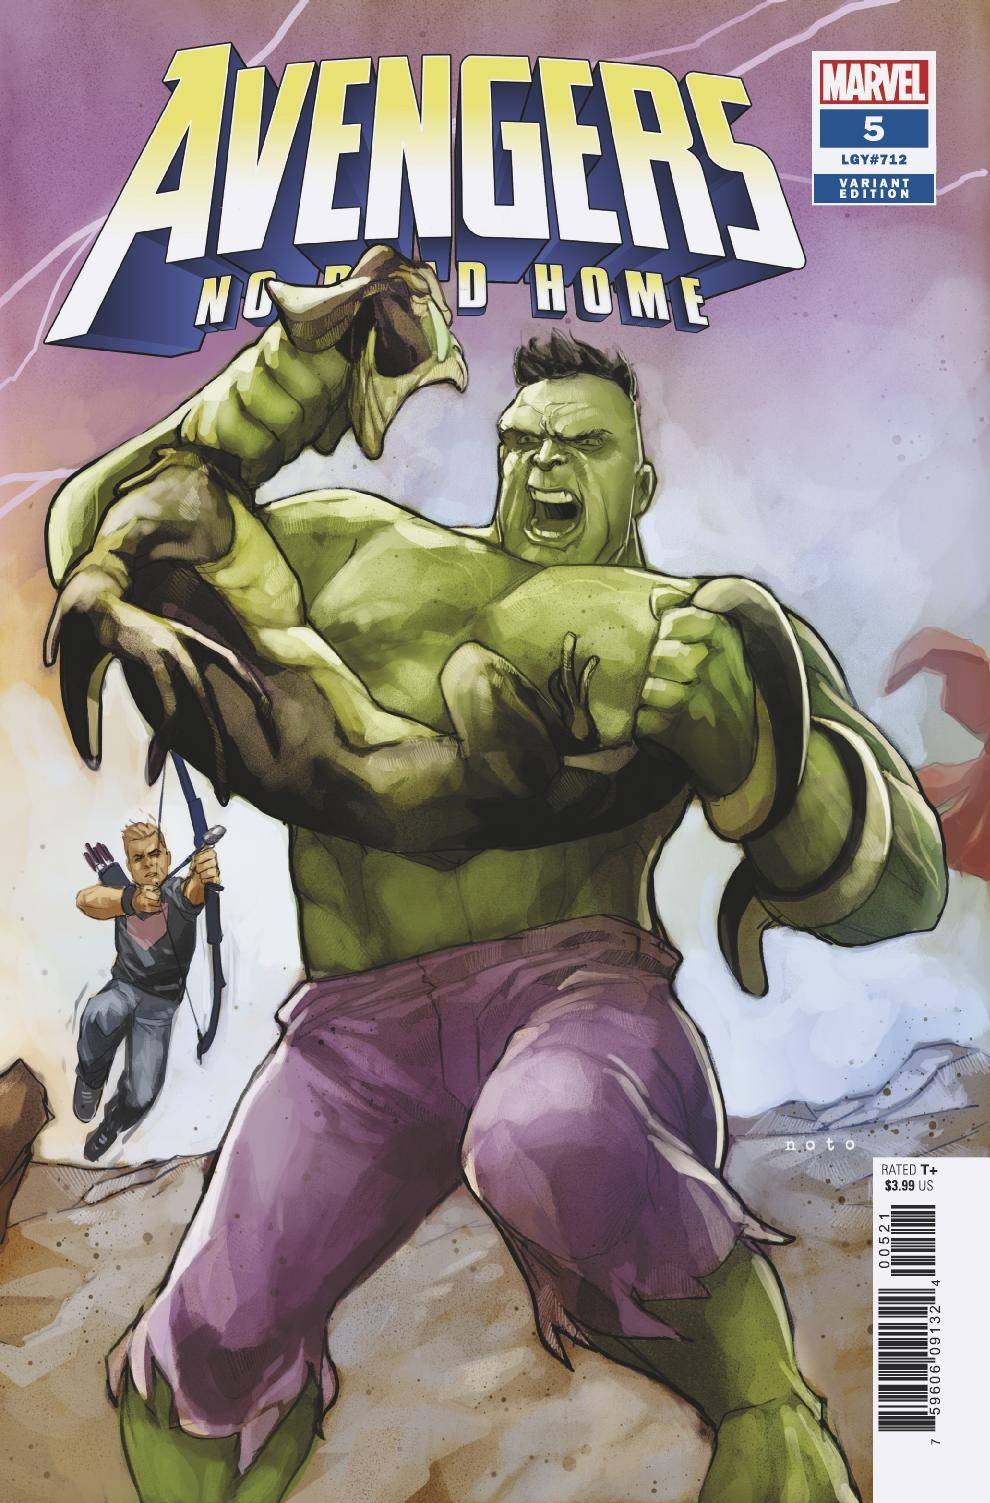 Avengers No Road Home #5 (Of 10) Noto Connecting Variant